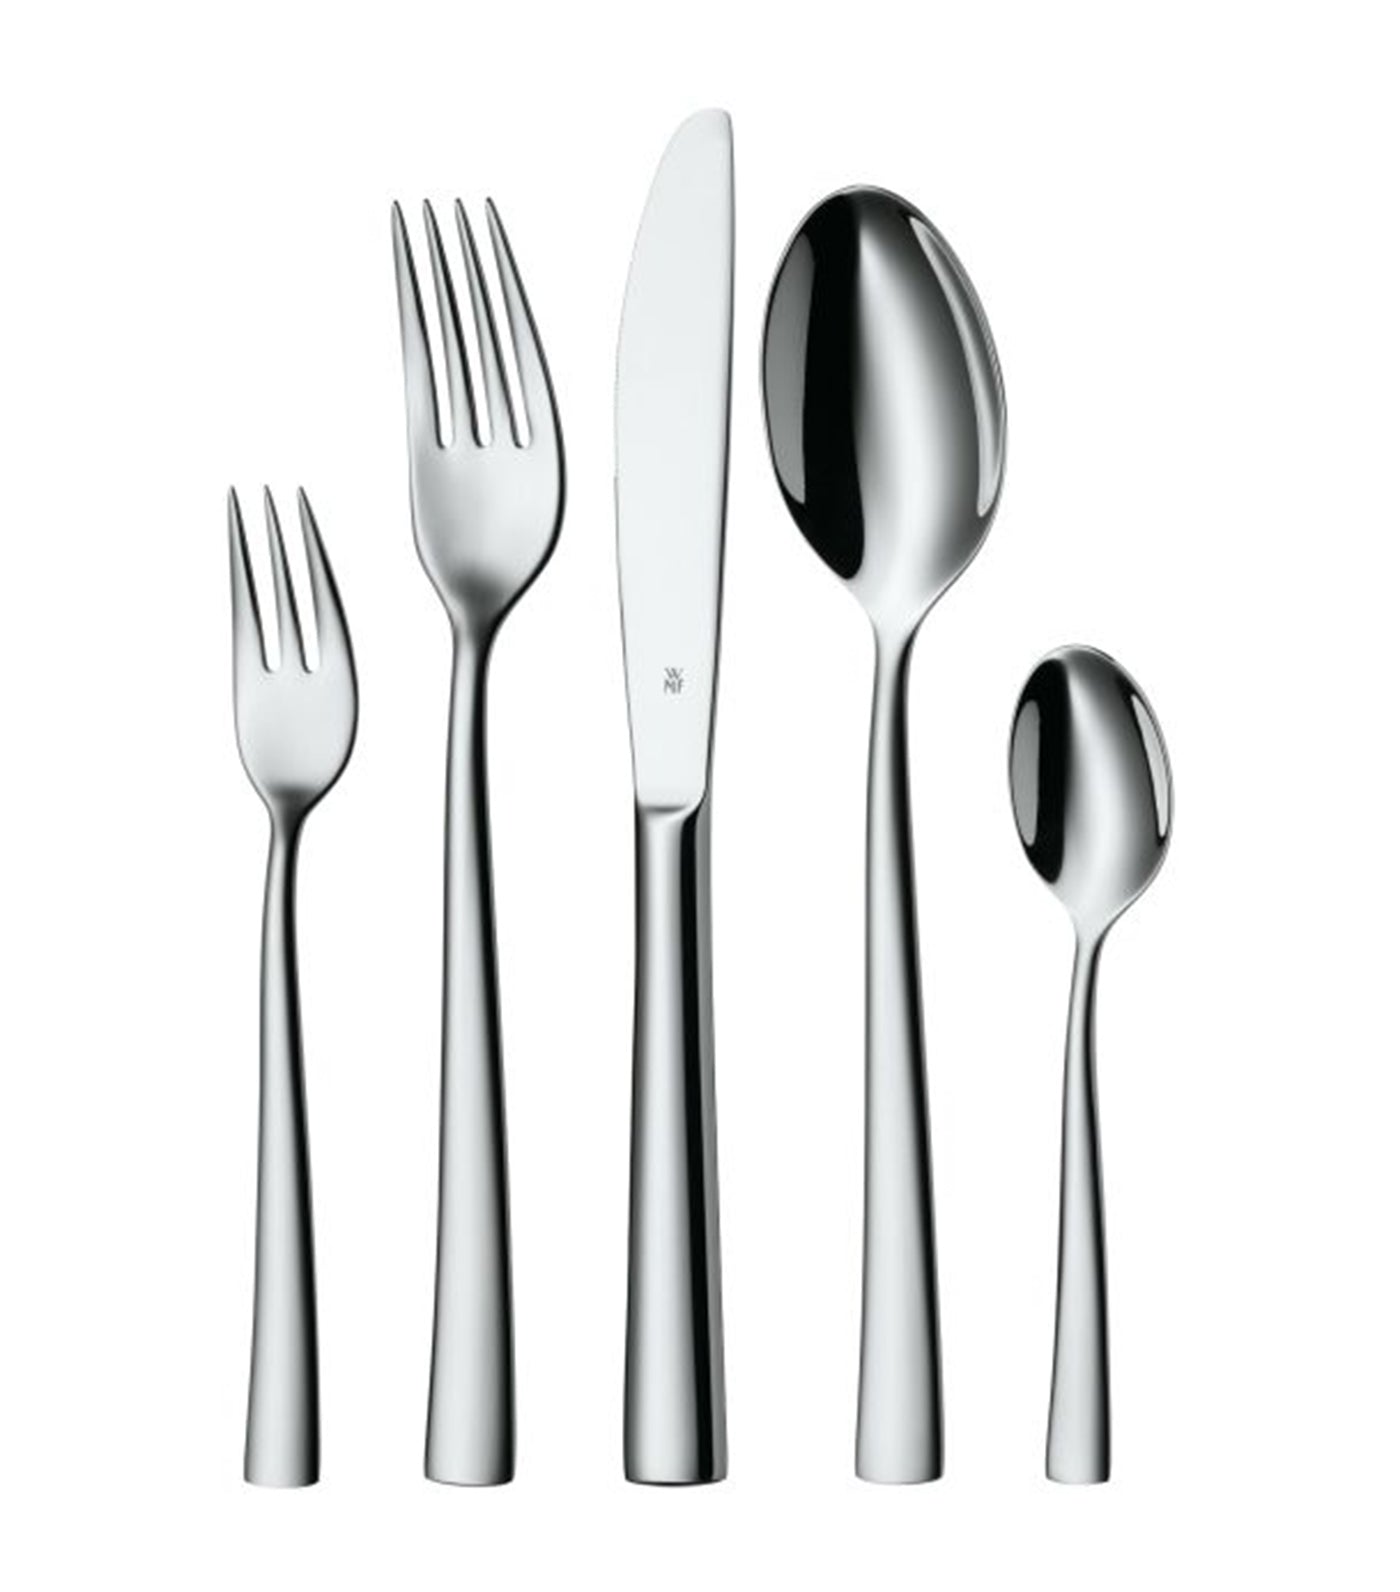 WMF Serving Set 3 Pieces Nuova Cromargan Stainless Steel 18/10 Brushed